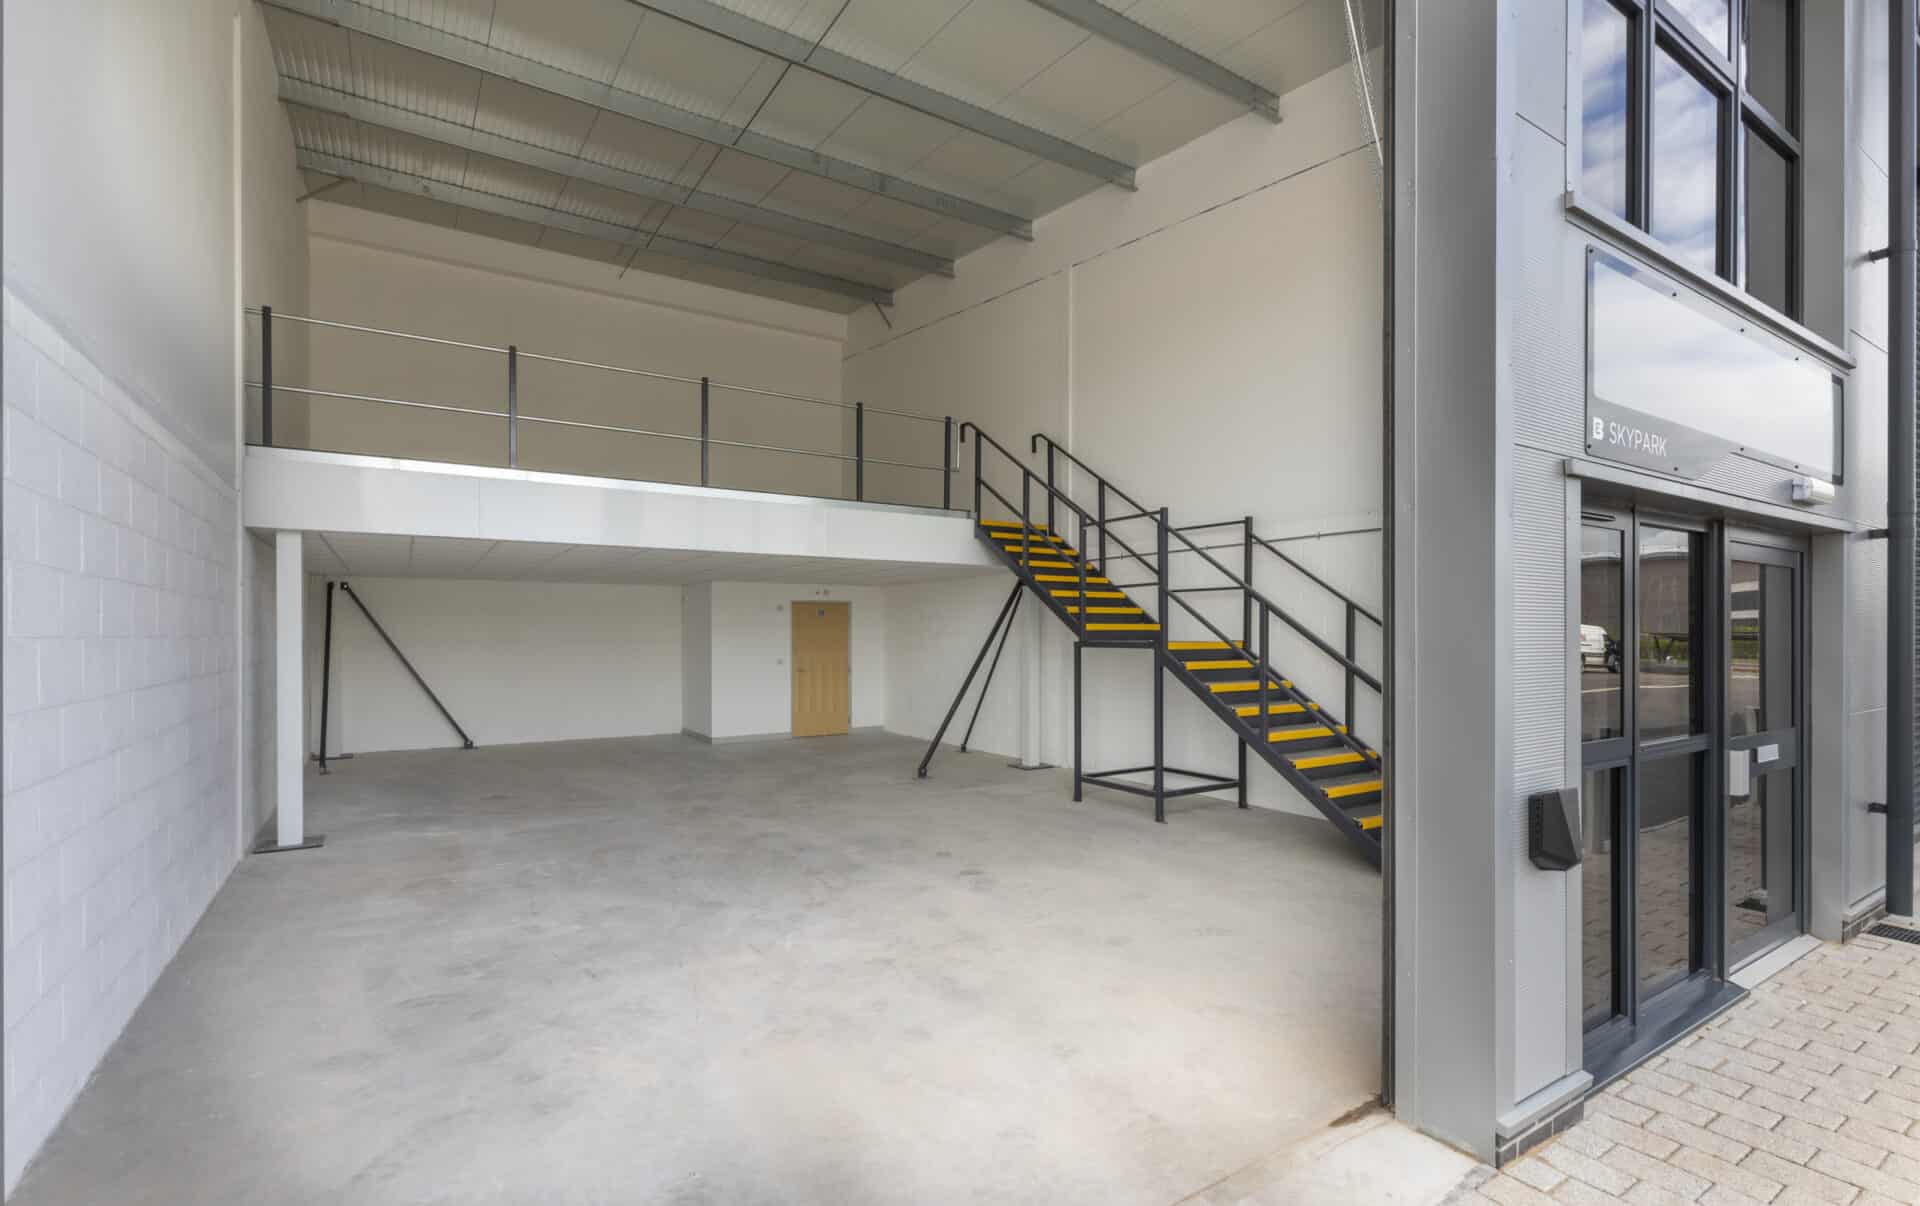 Interior view of a light industrial unit with a half mezzanine layout, offering flexibility for client-specific adaptations.